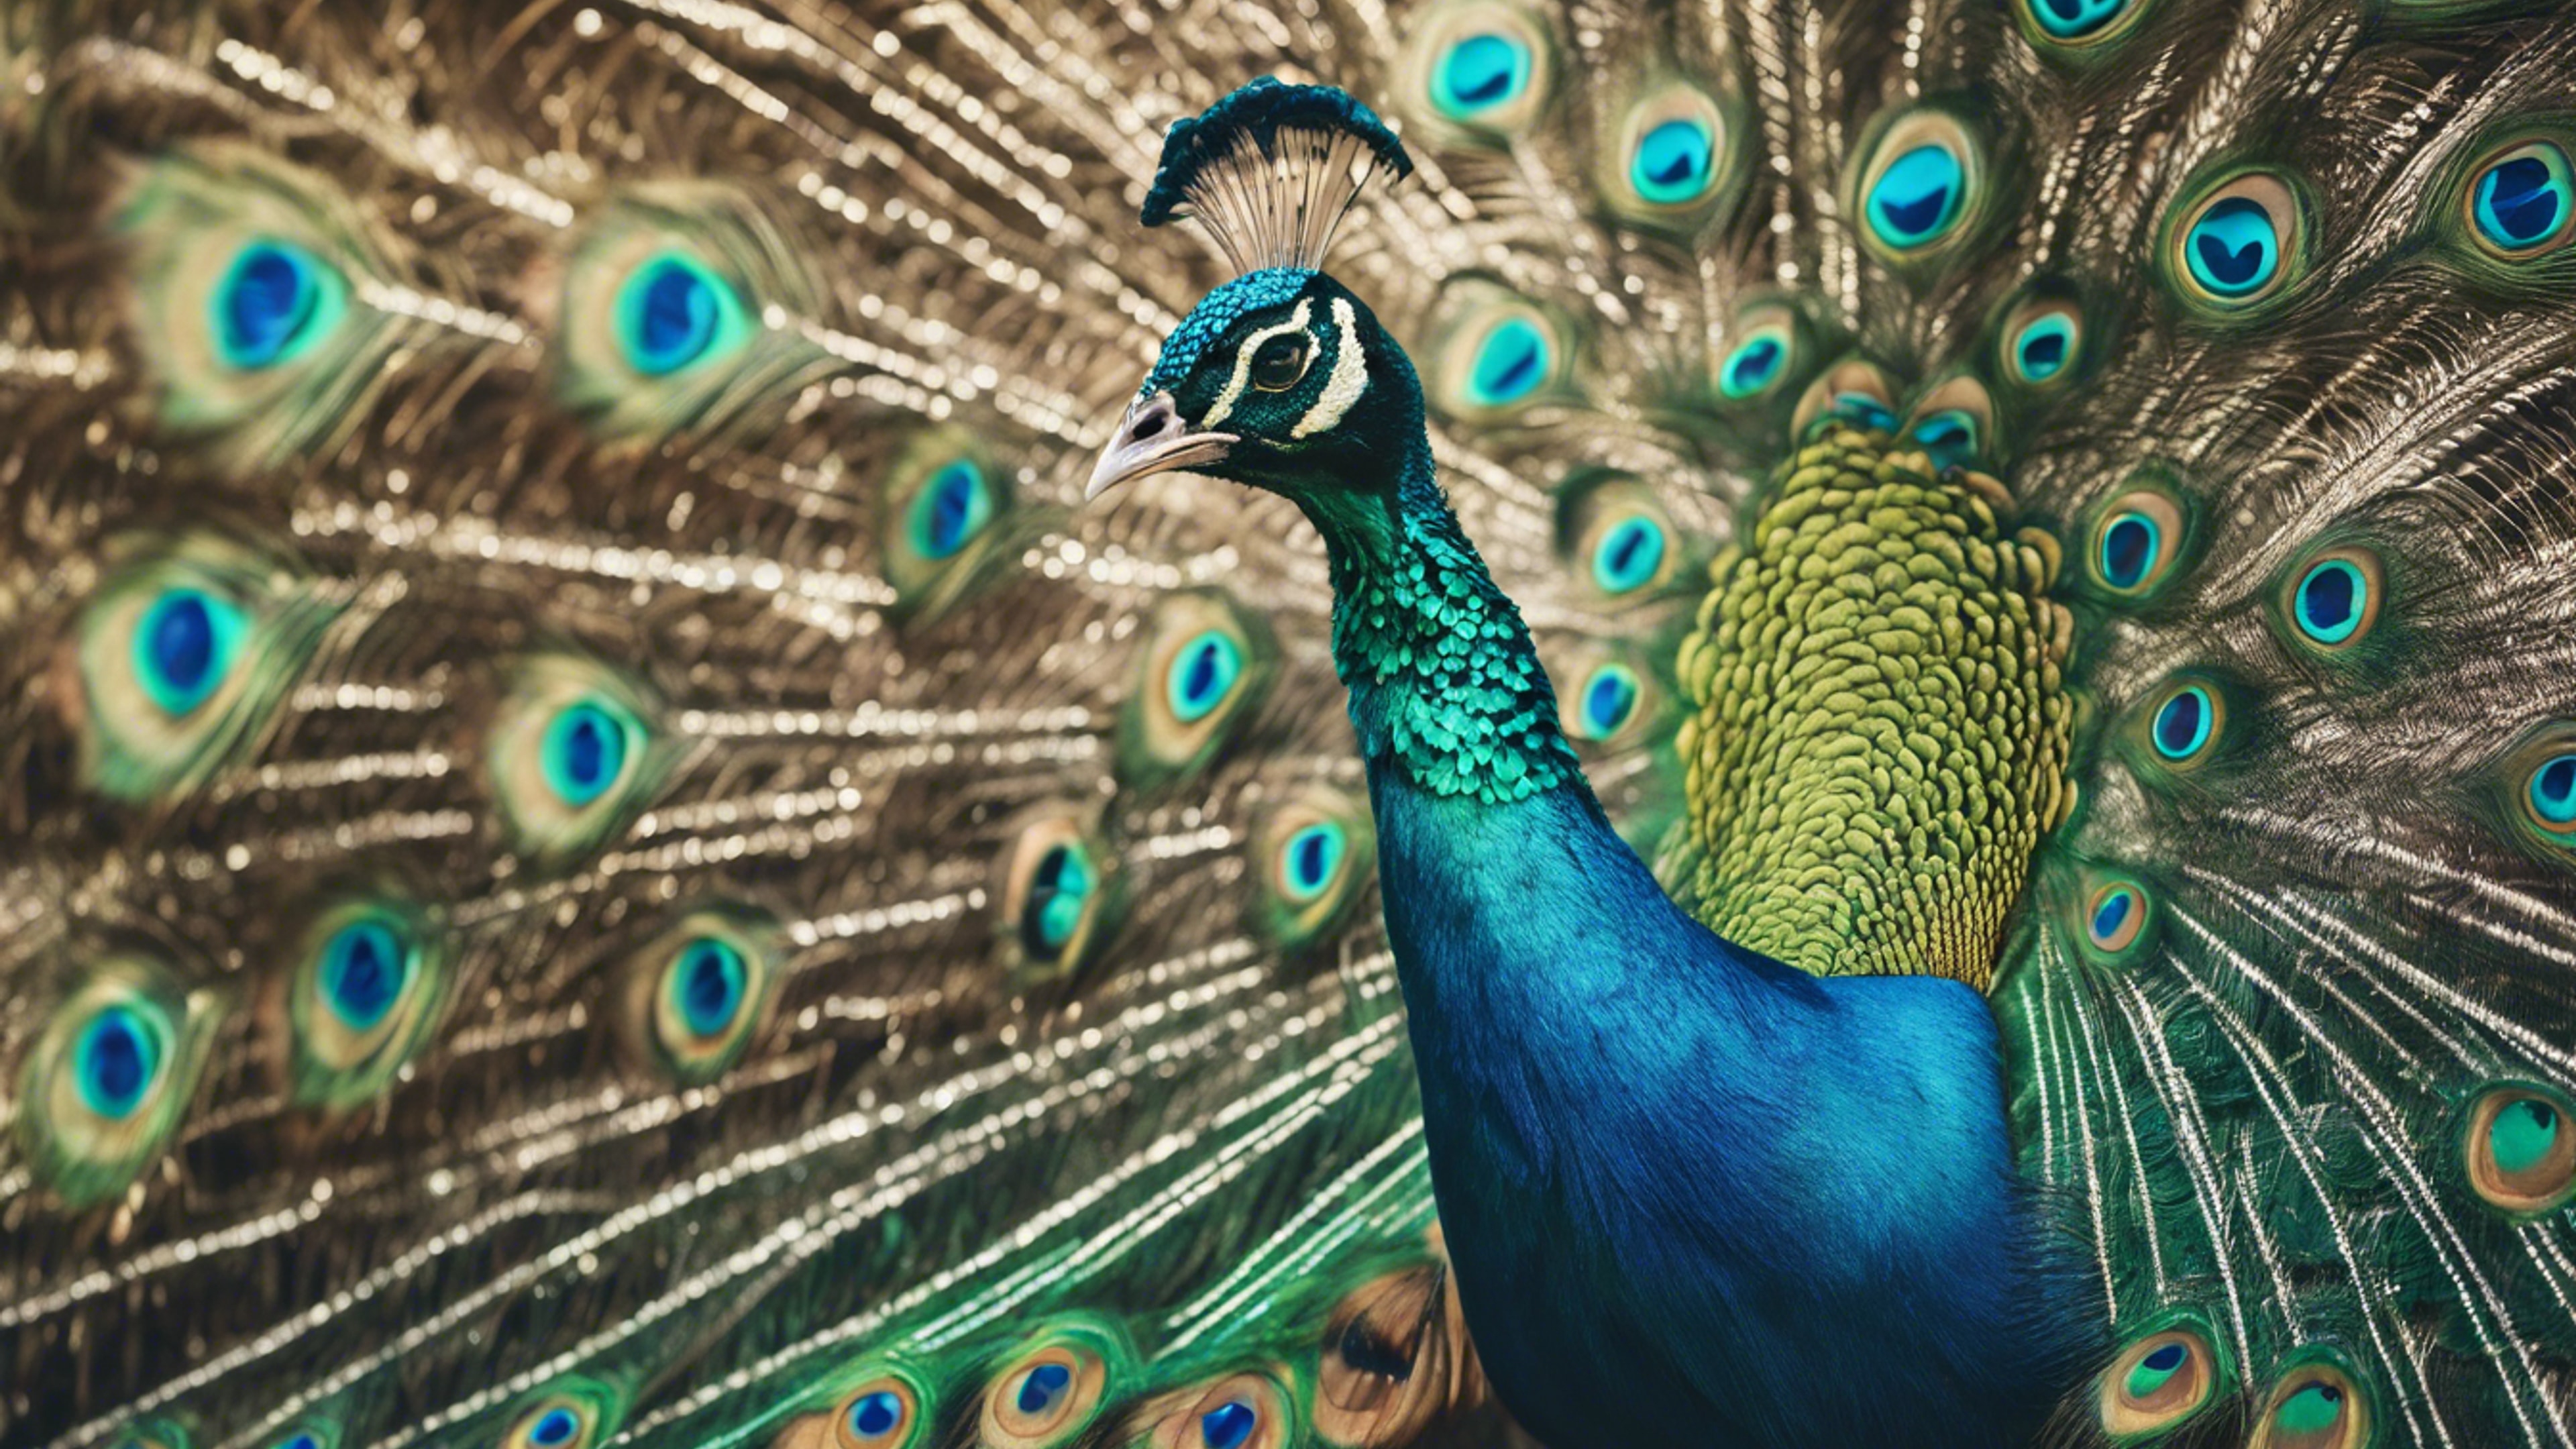 A proudly standing peacock showing off its cool teal plumage. Wallpaper[c03cd8acf17648f0a47e]